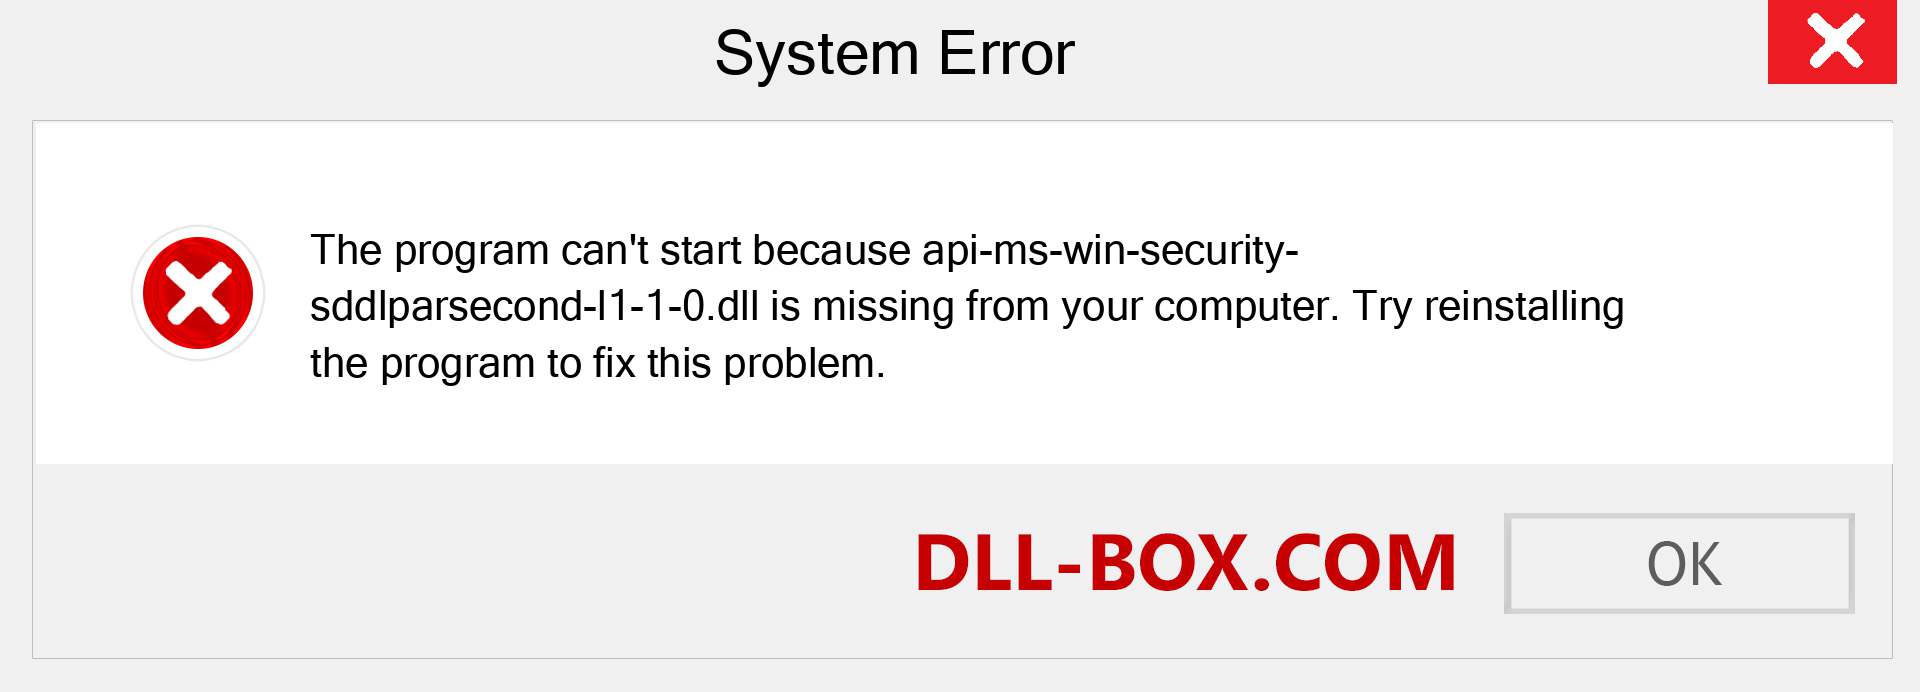  api-ms-win-security-sddlparsecond-l1-1-0.dll file is missing?. Download for Windows 7, 8, 10 - Fix  api-ms-win-security-sddlparsecond-l1-1-0 dll Missing Error on Windows, photos, images